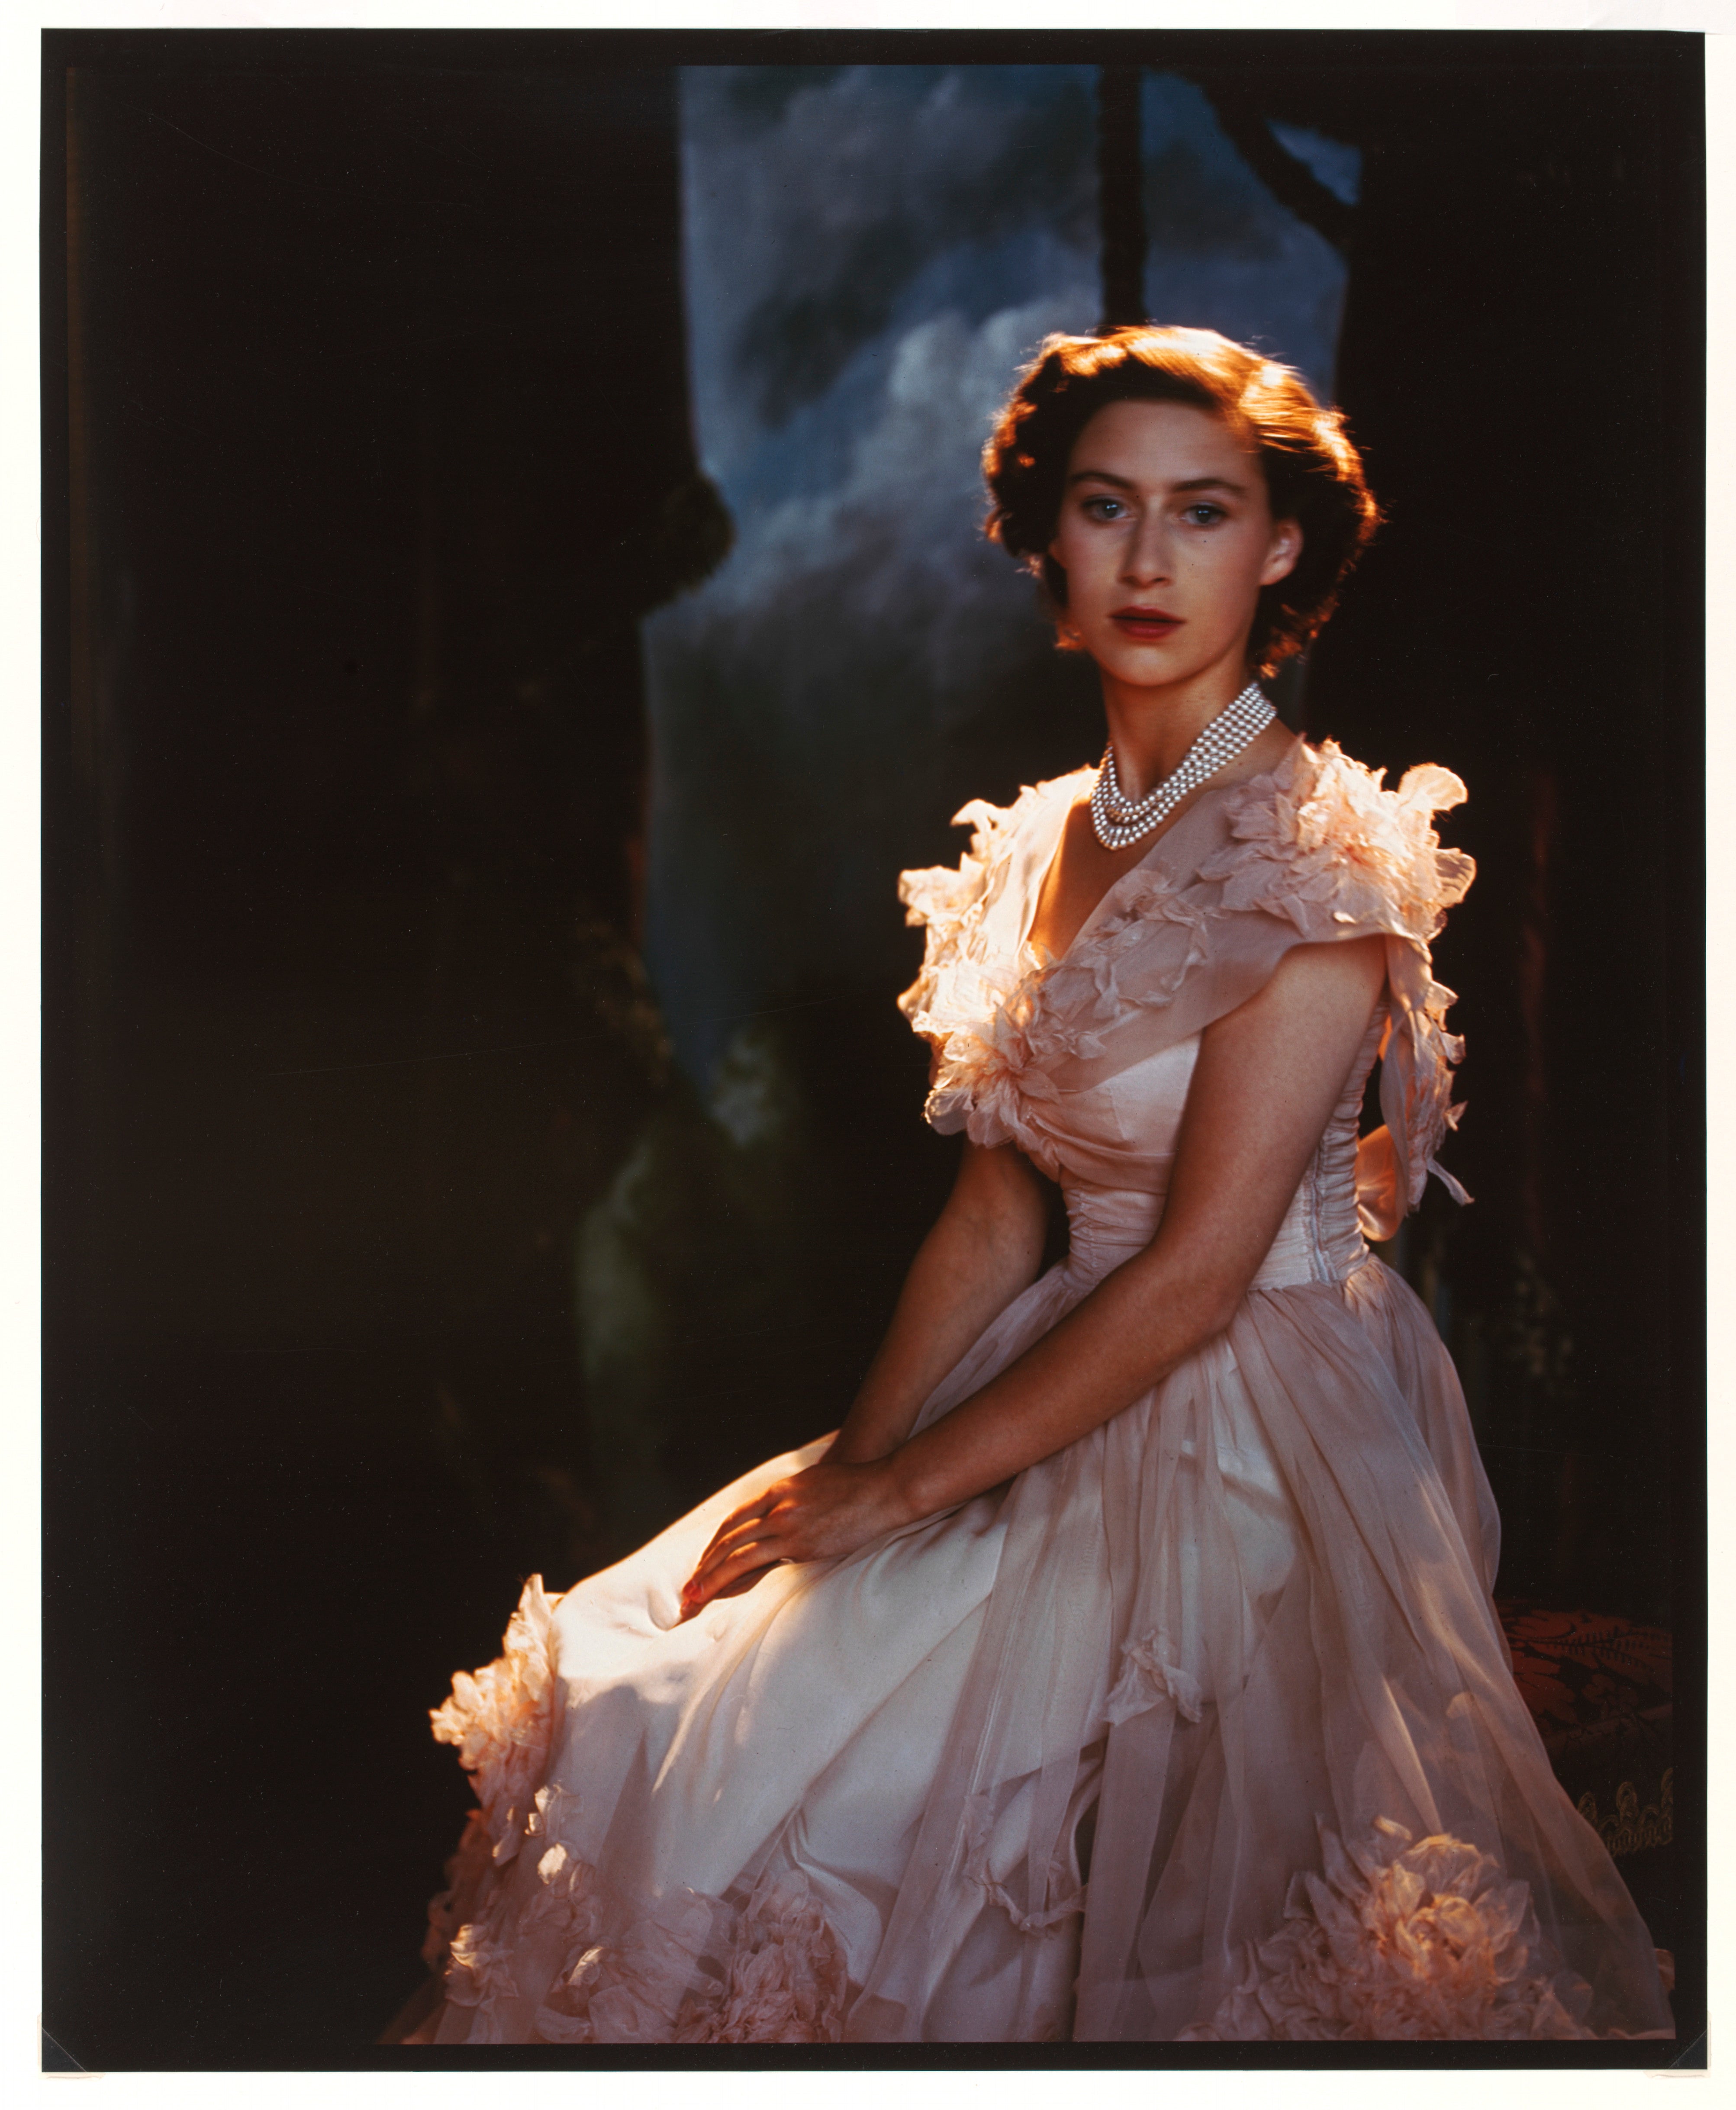 Princess Margaret aged 19 by Cecil Beaton (Cecil Beaton/Victoria and Albert Museum, London/PA)